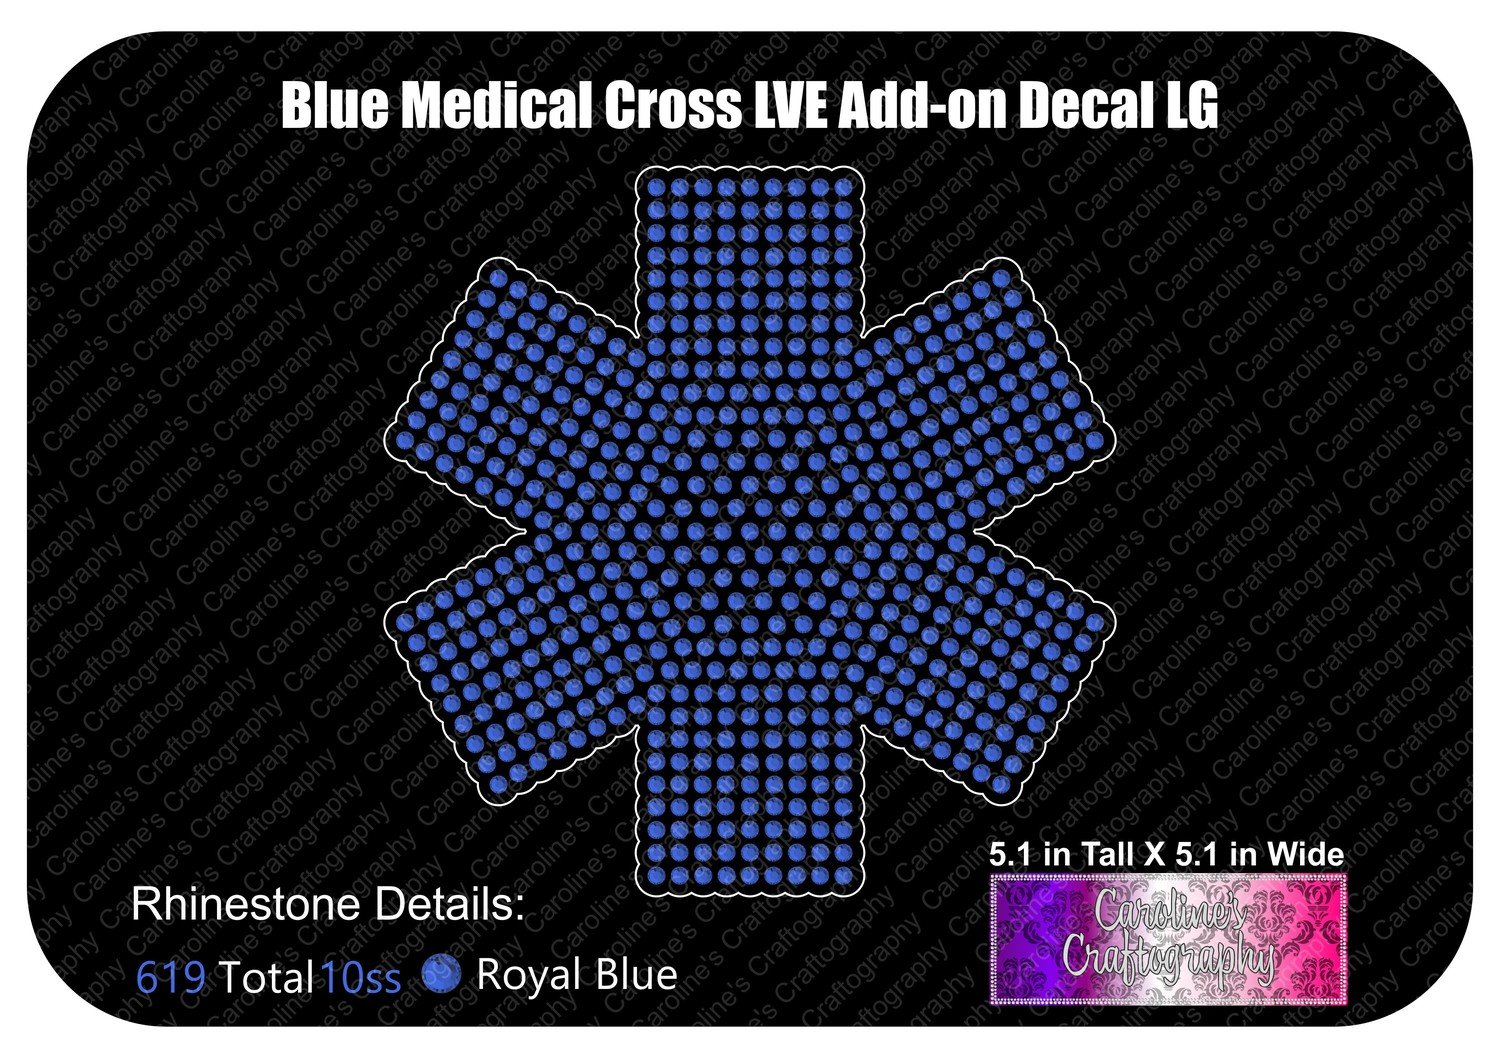 Blue Medical Cross LVE Add-on Decal Stone Large